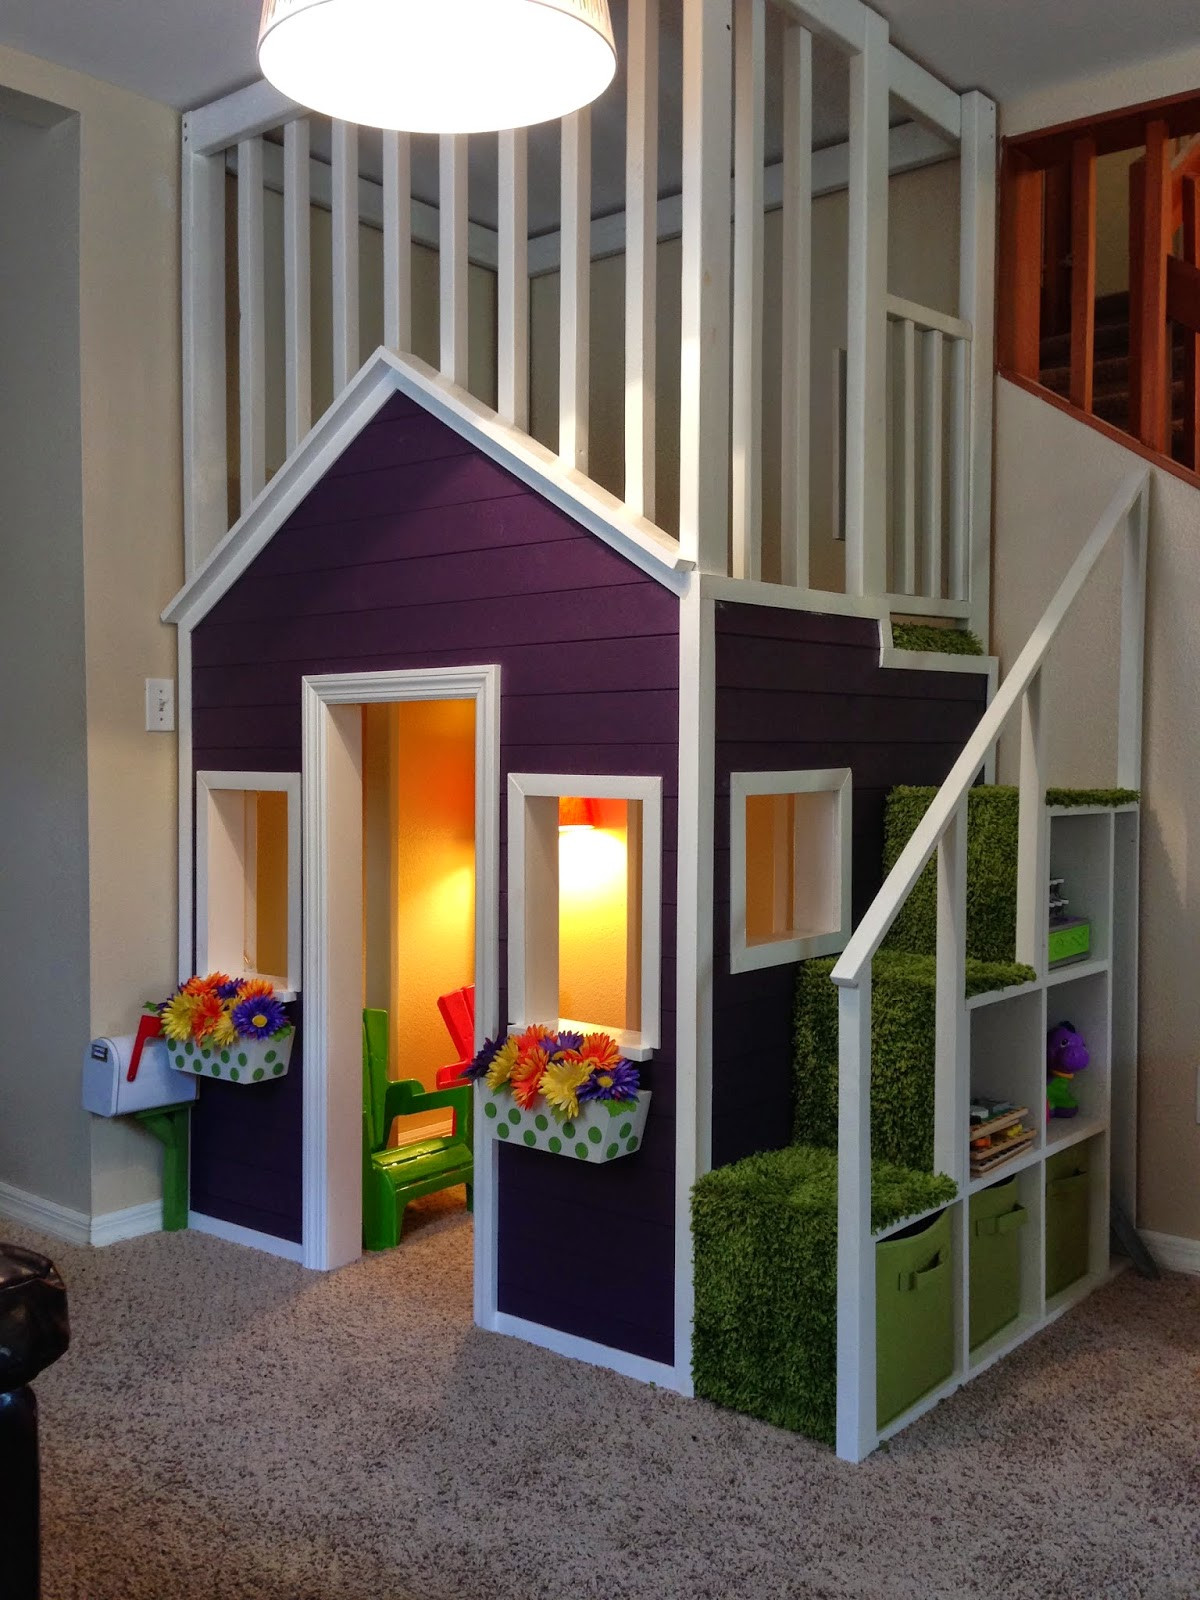 Kids Indoor Playhouse
 The Duncan Family Indoor Playhouse